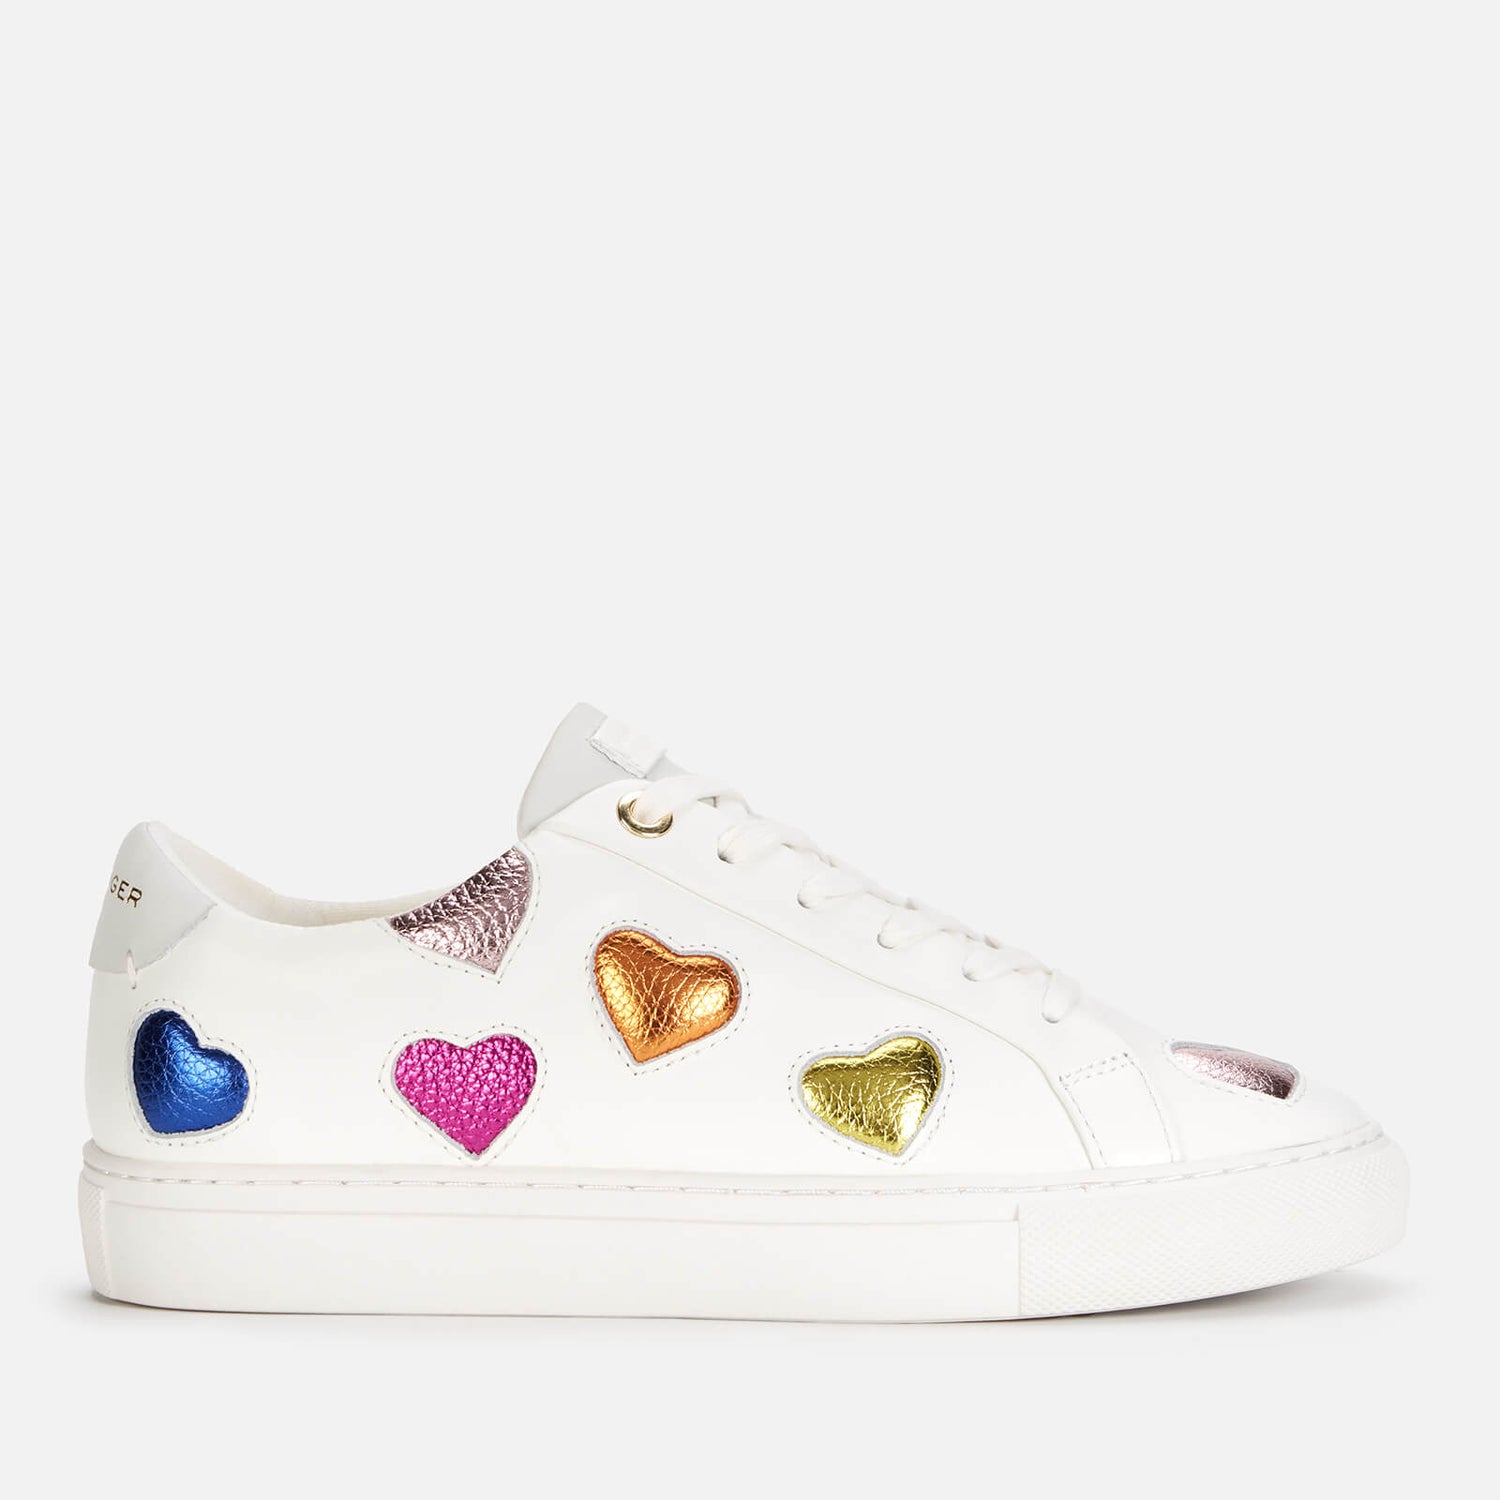 Kurt Geiger London Women's Laney Love Leather Cupsole Trainers - Mult/Other